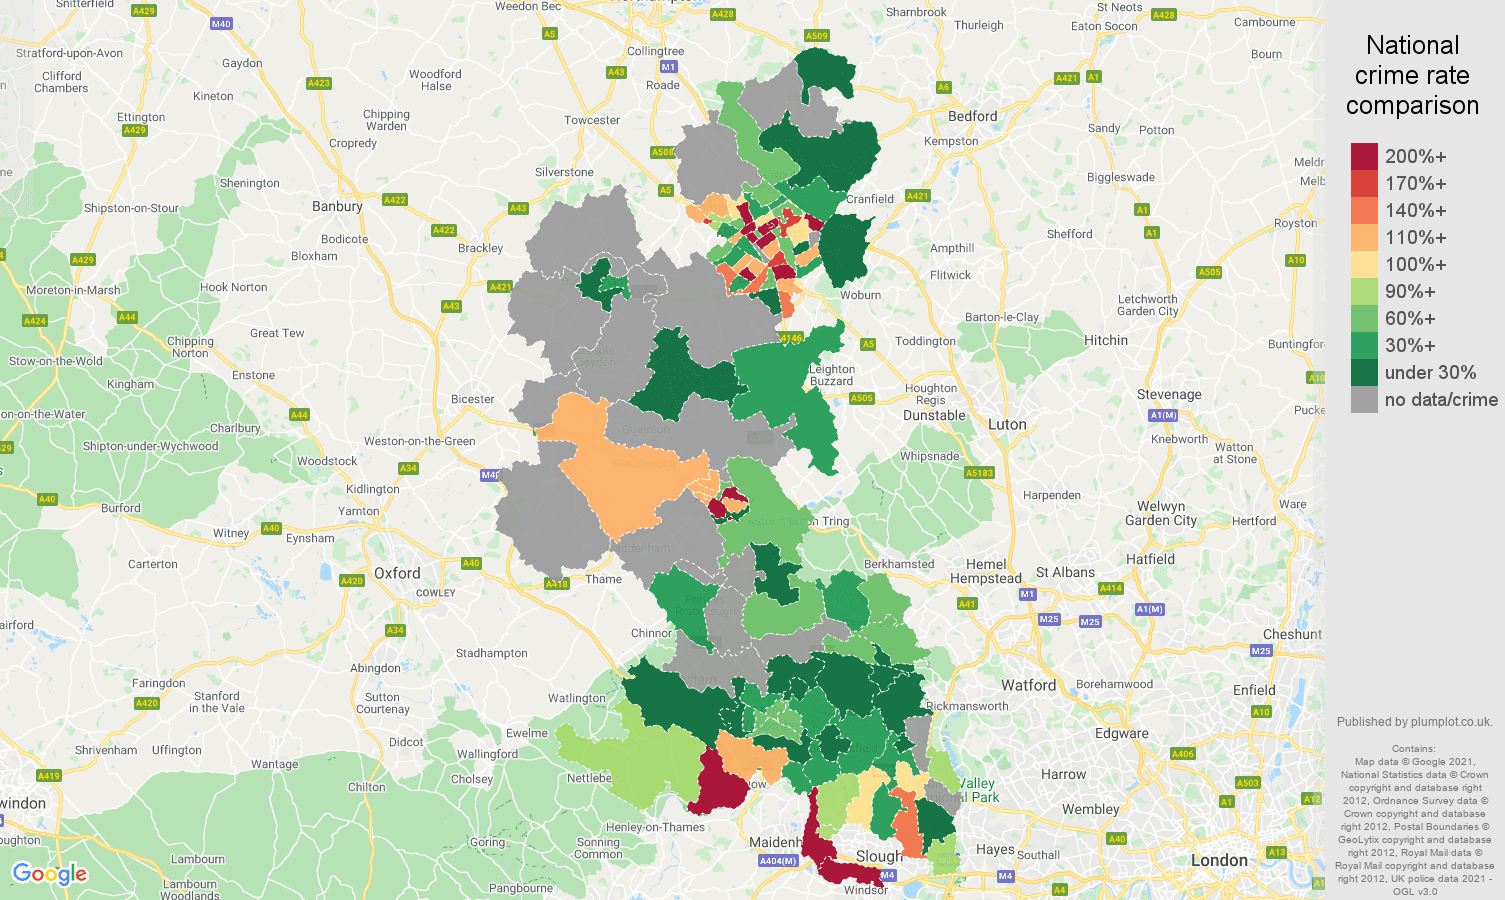 Buckinghamshire bicycle theft crime rate comparison map